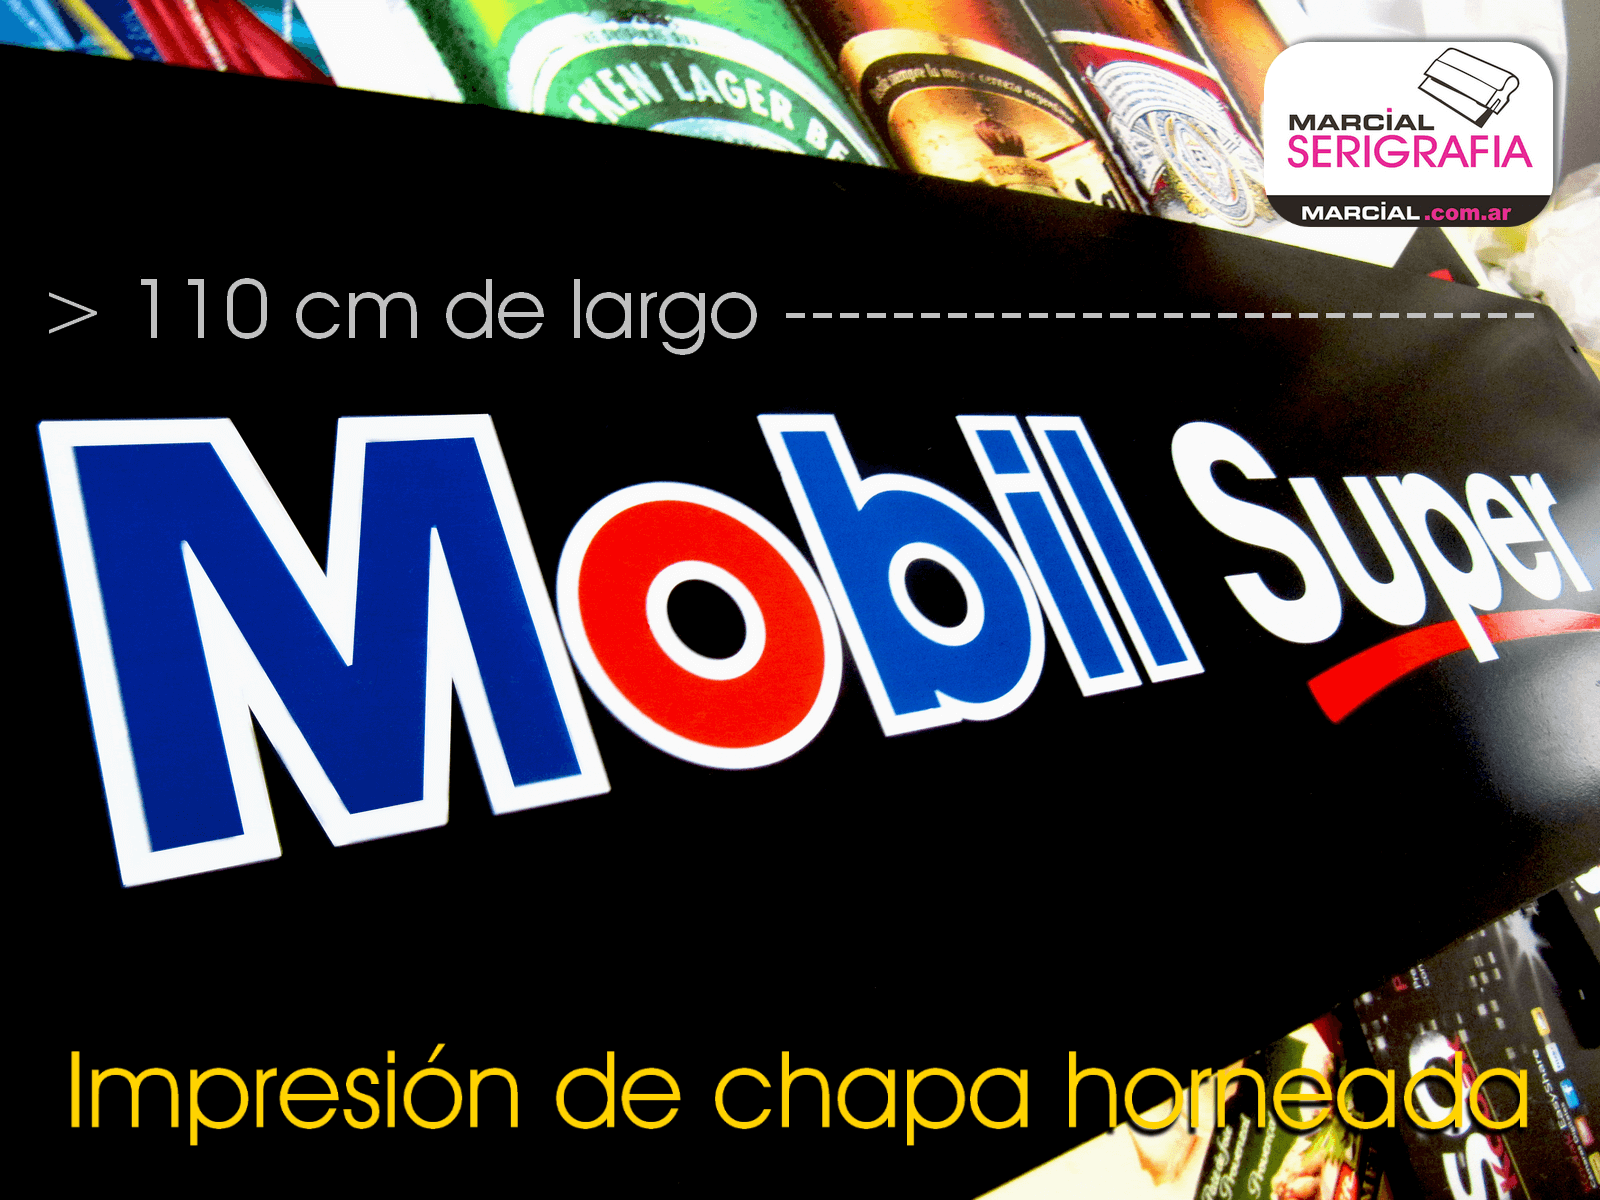 Screen printing on enameled plate for the "Mobil Super" Lubricants brand, printed in 2 colors + sectorized white base that served as "support" for the red and blue colors in order to keep the colors bright. This is what is done when working with dark-based materials and you want the printed colors to respect a tone already preset by the factory. This printed work was done by Marcial Serigrafía.